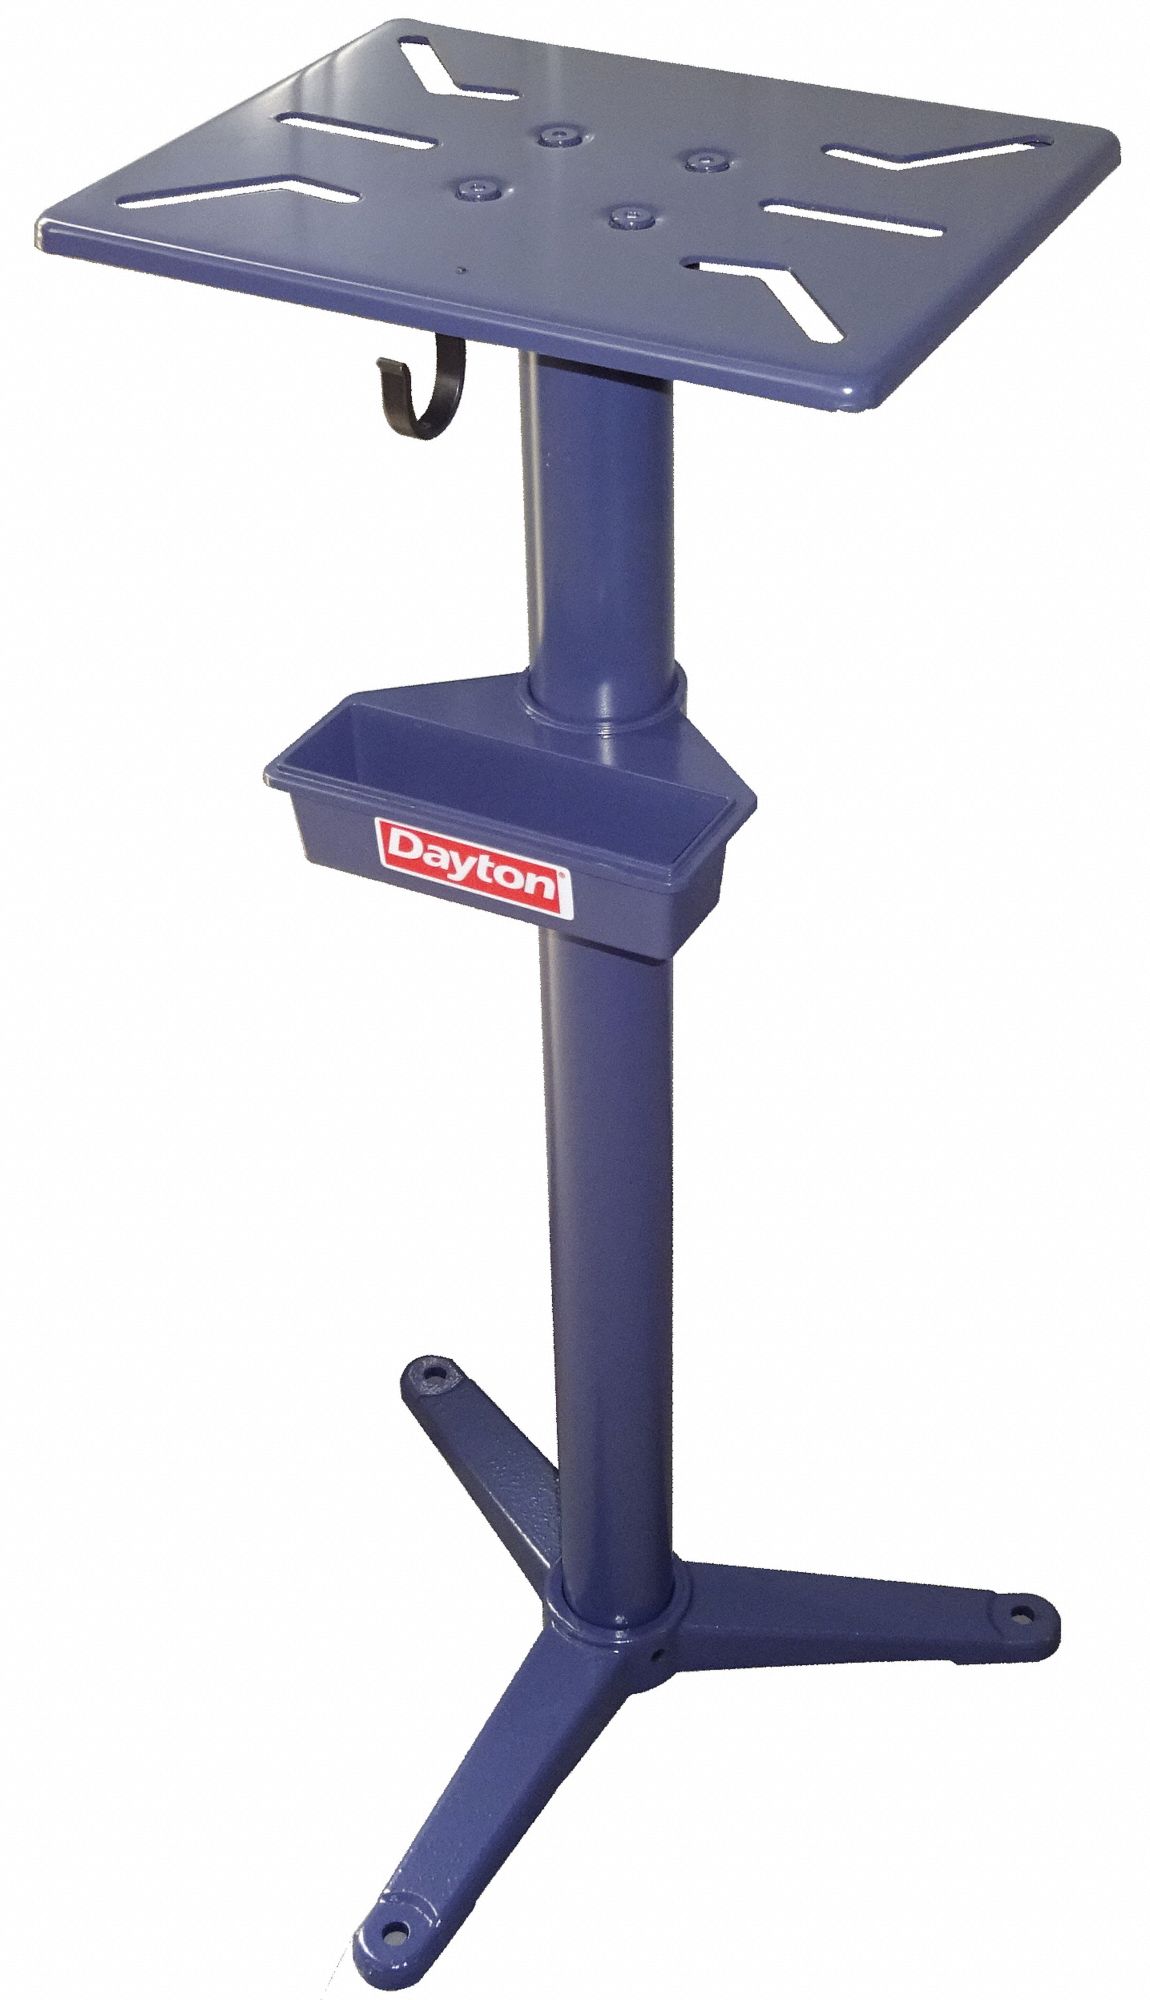 SHOP FOX Heavy-Duty Stand For Bench Grinder, Model# M1108